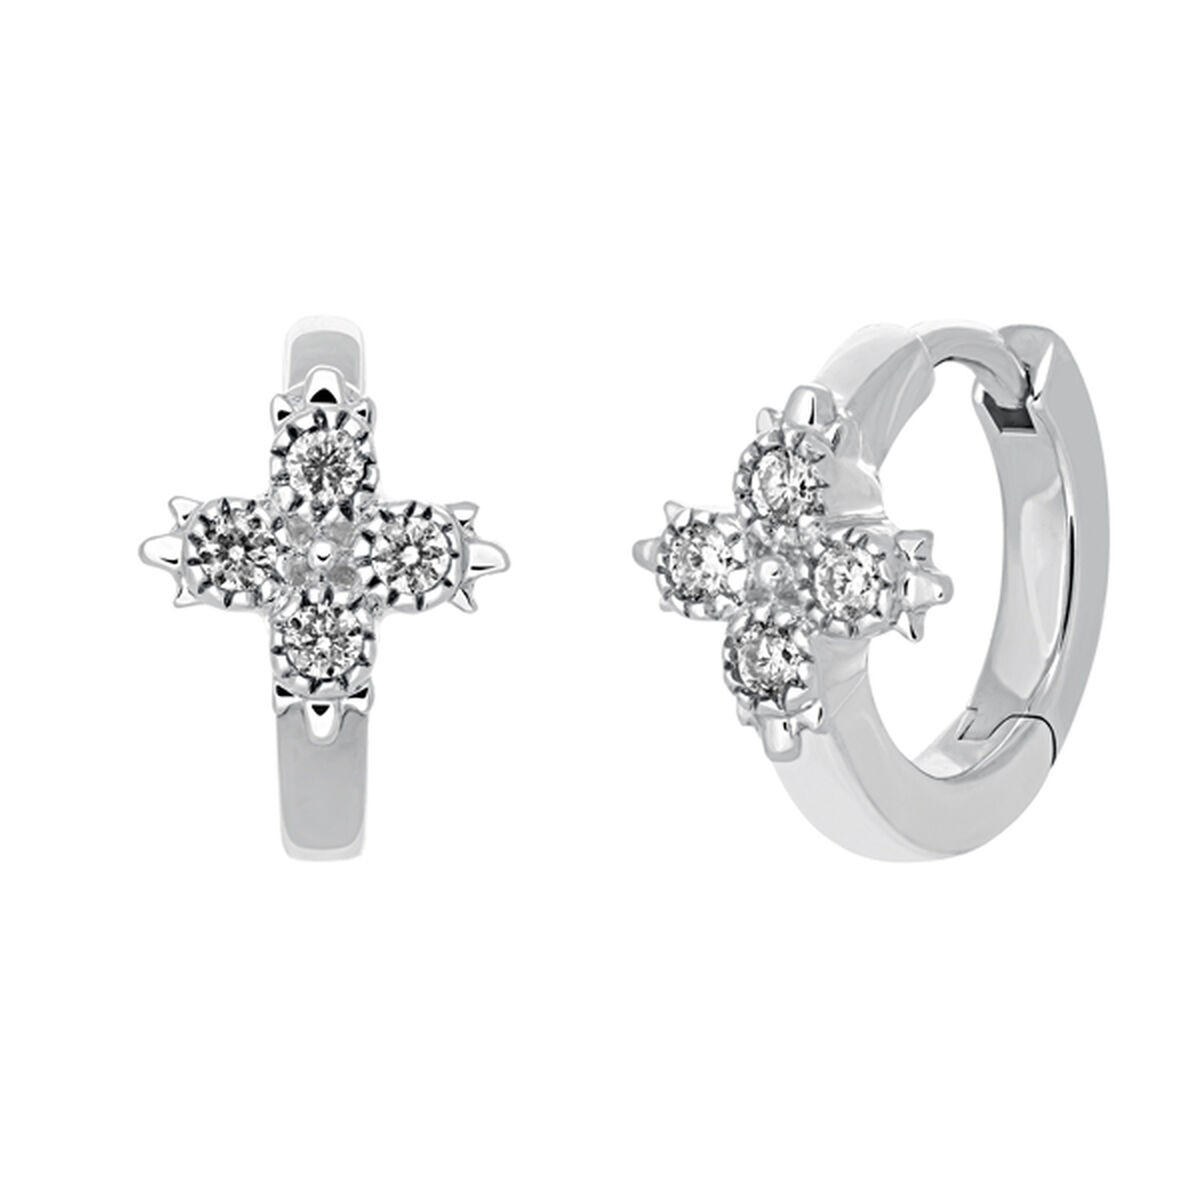 Single small hoop earring in 9k white gold with a diamond cross, J03386-01-H, hi-res